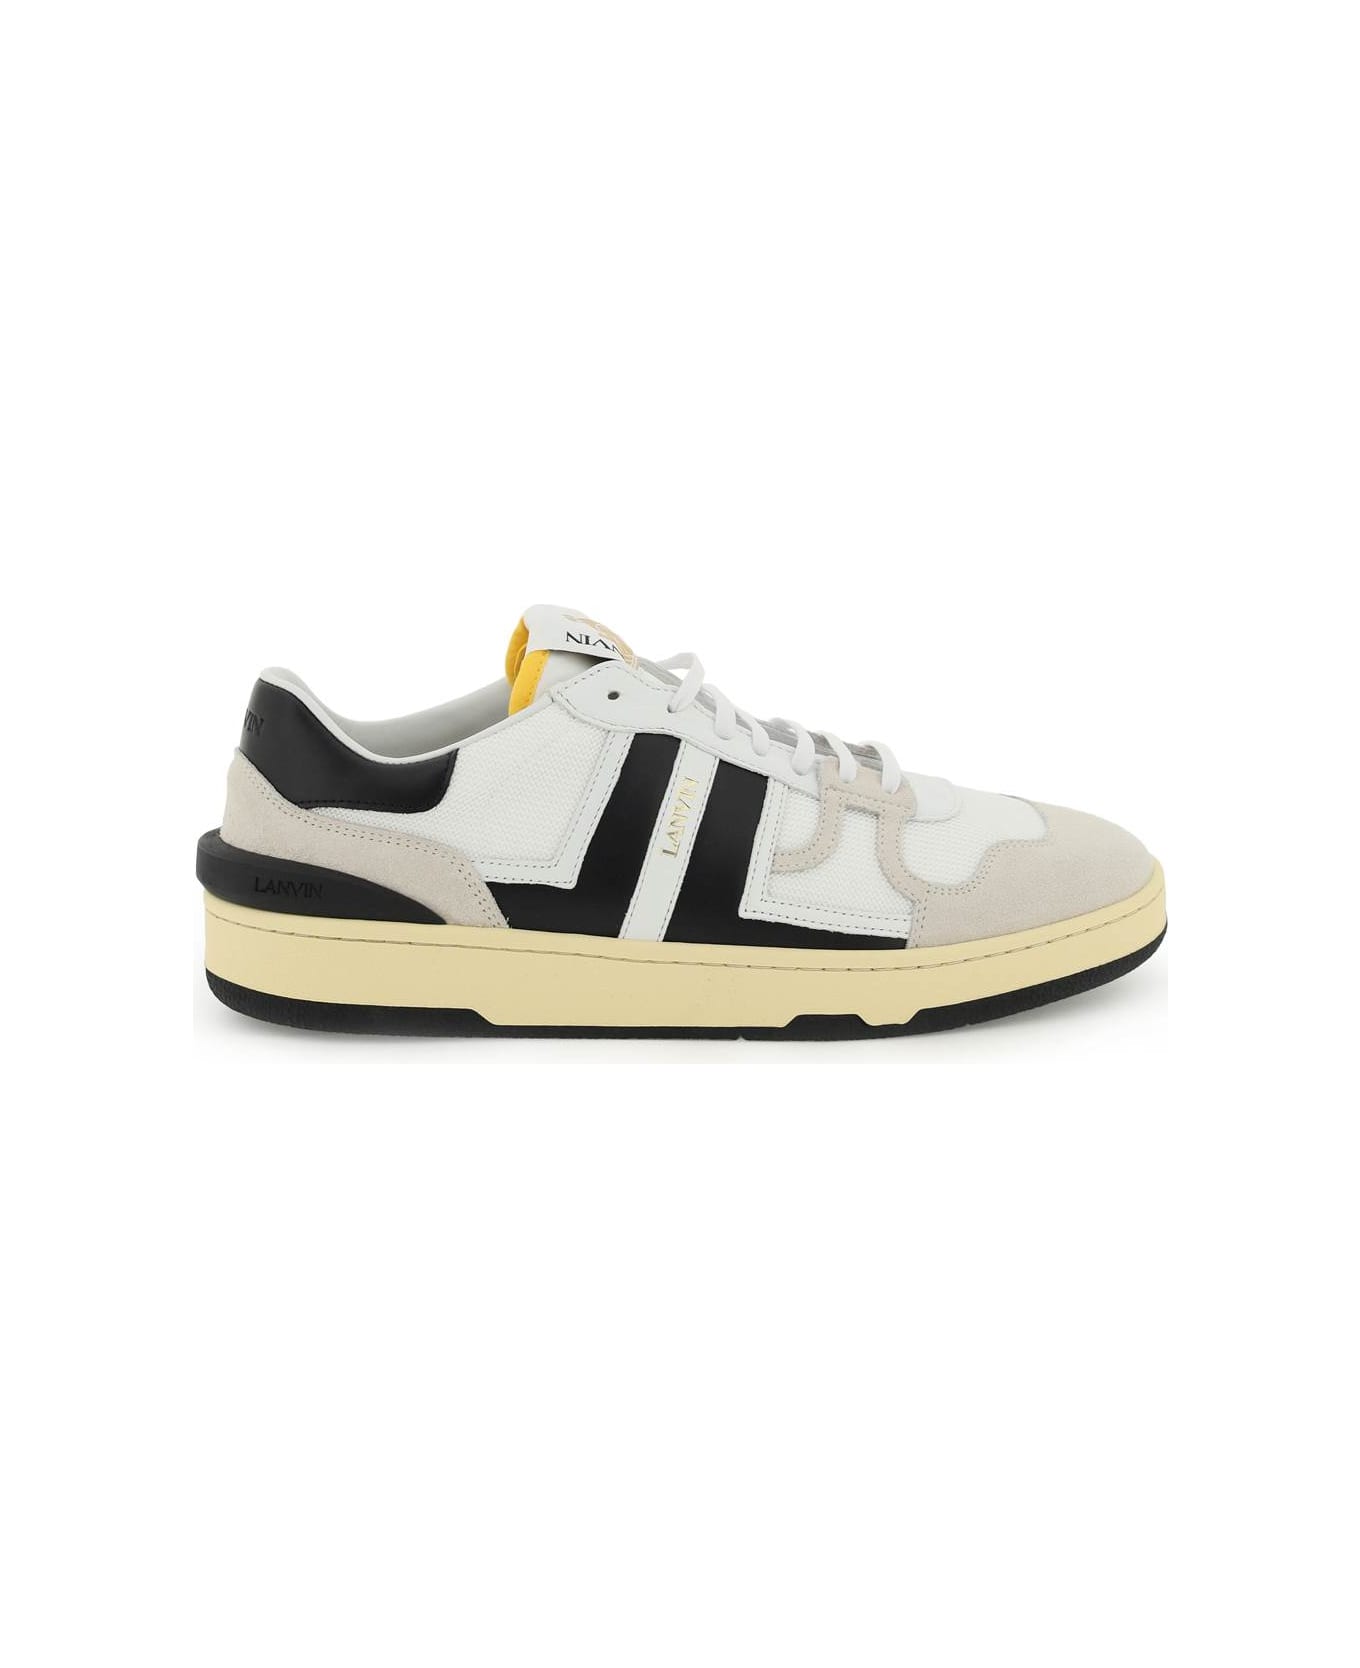 Lanvin 'clay' Sneakers - WHITE スニーカー